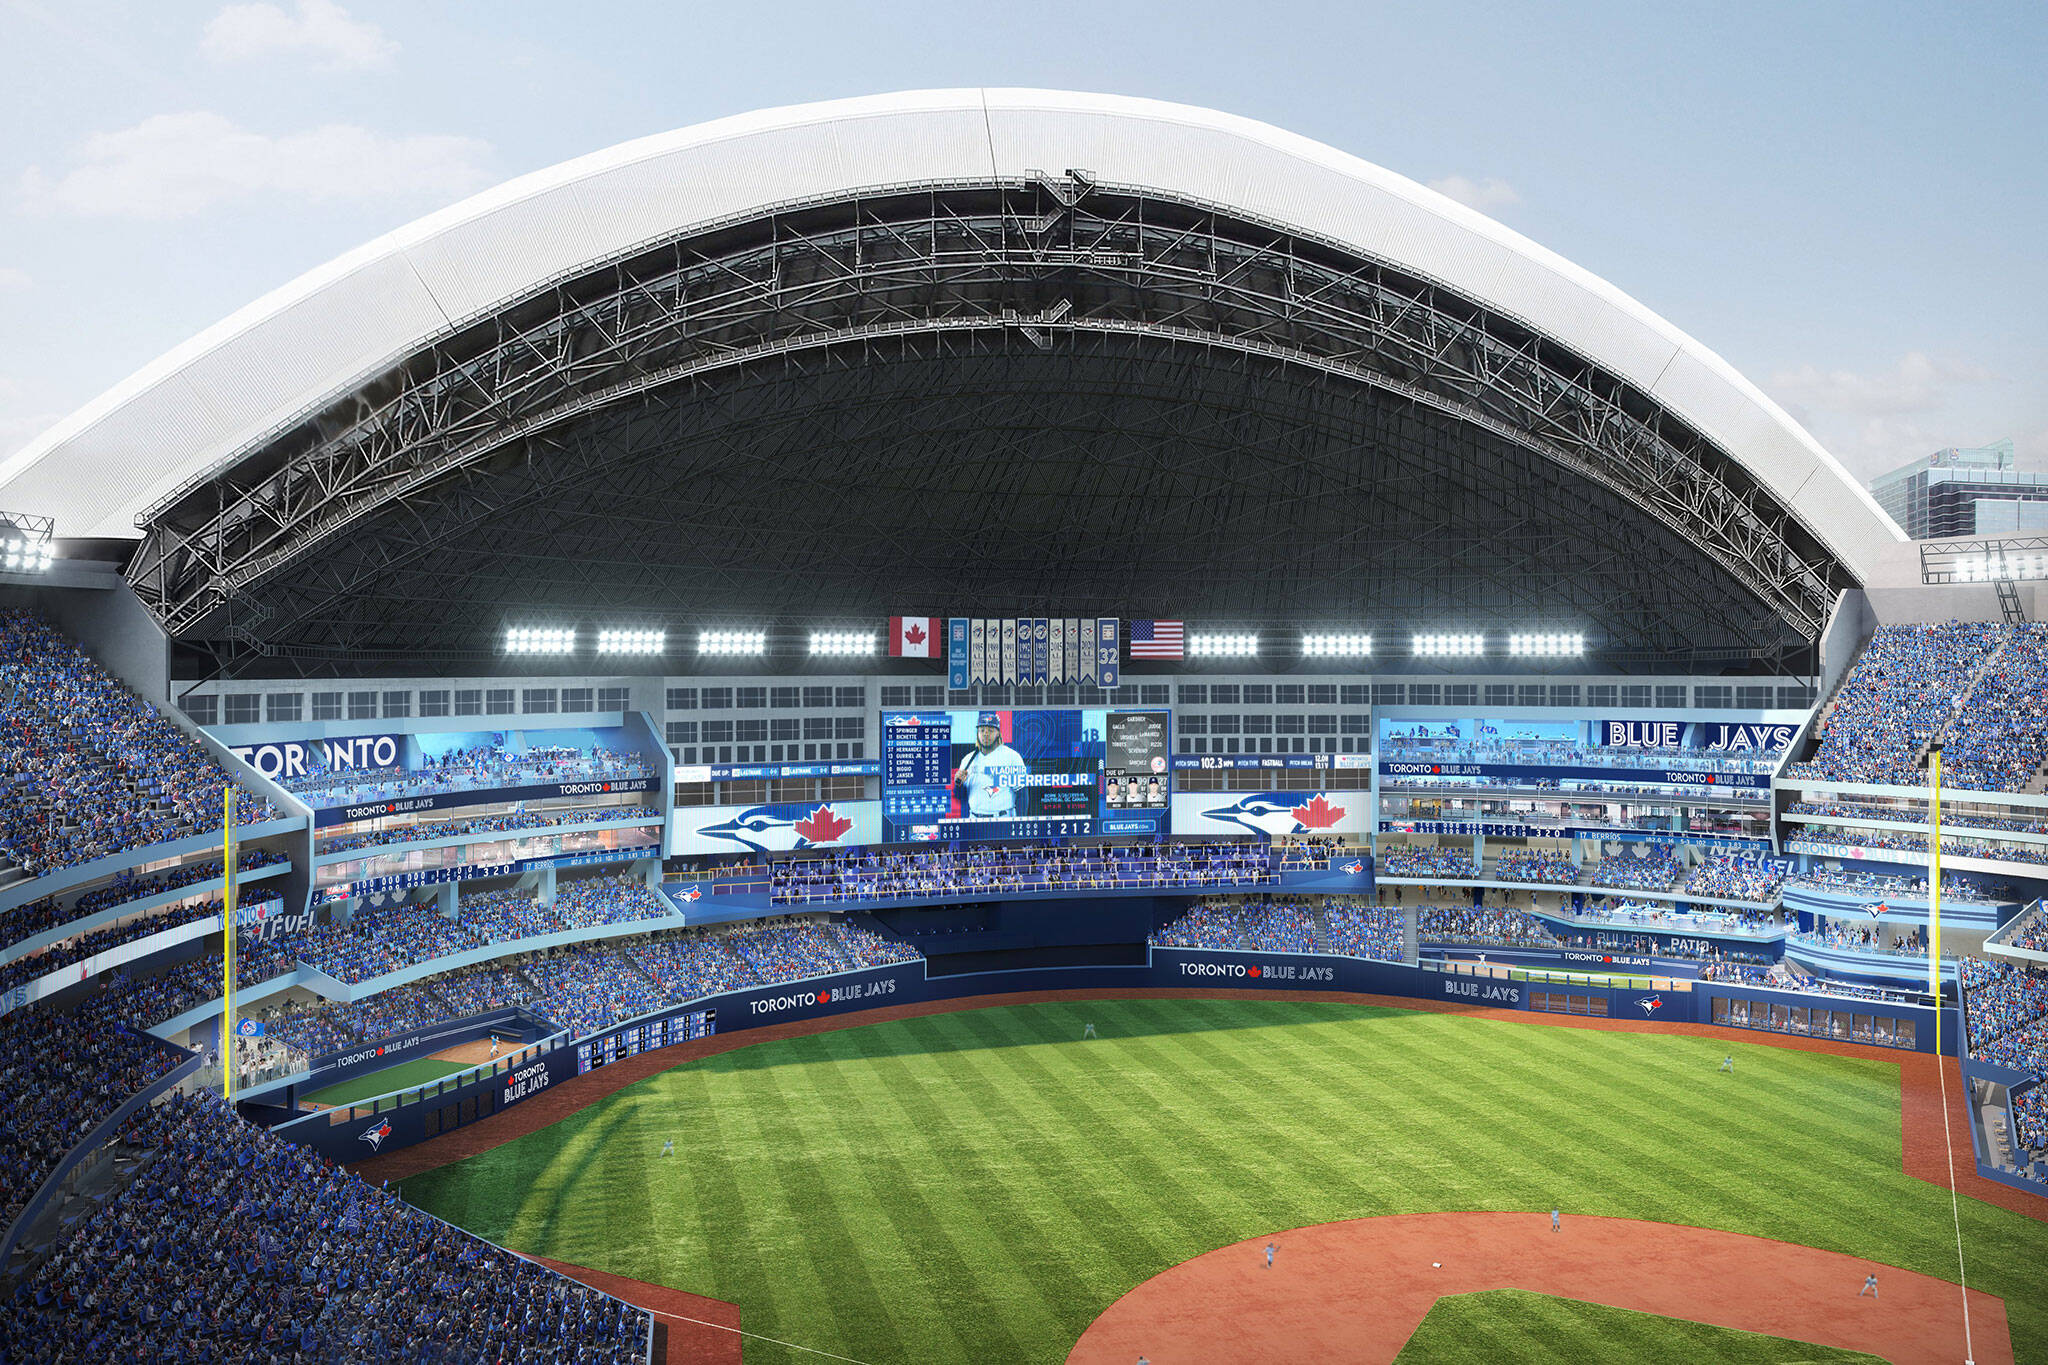 Here's what the Rogers Centre's new 300 million upgrades will look like